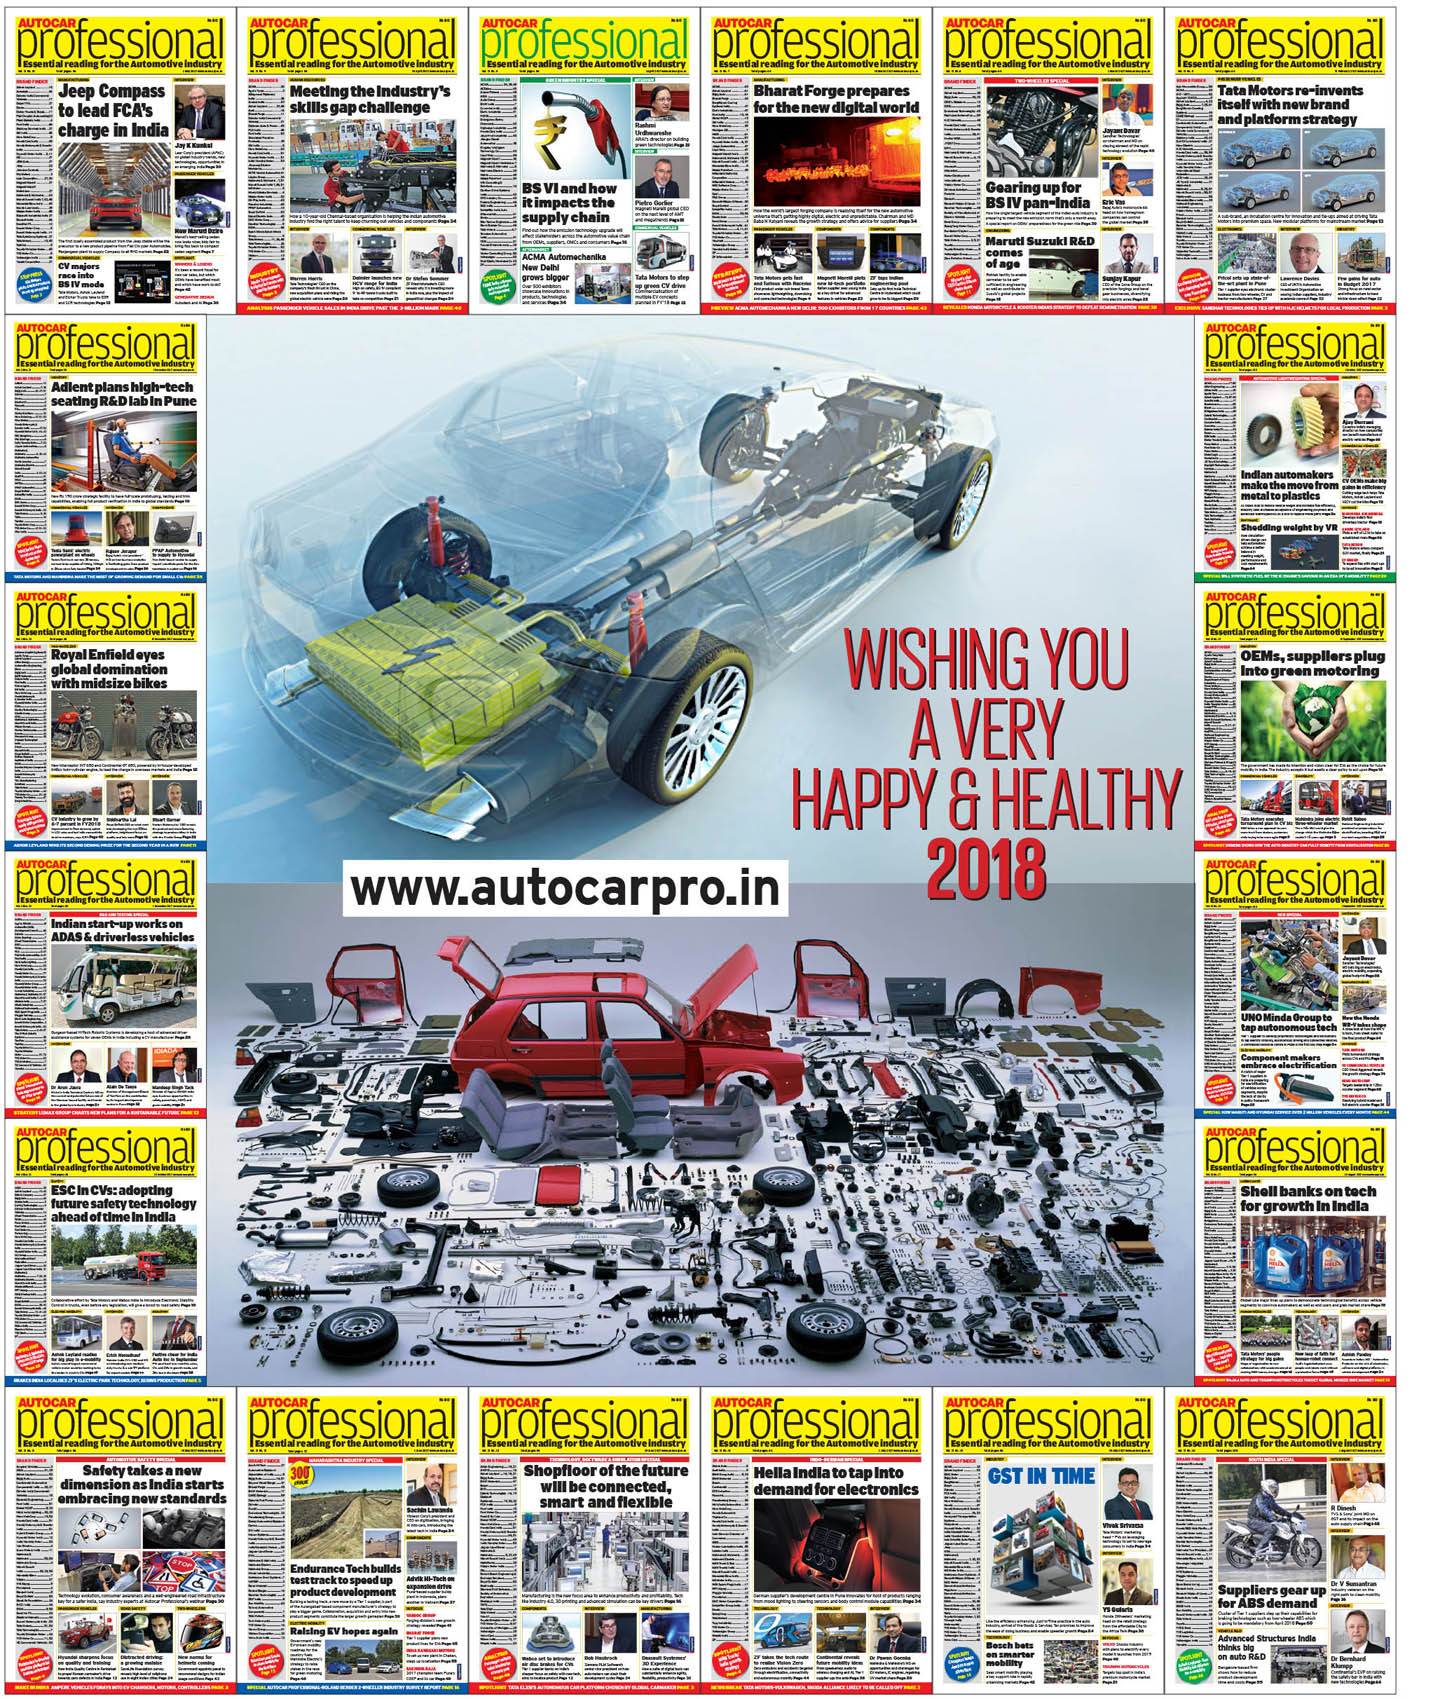 autocar-professional-wishes-you-a-very-happy-new-year-2018